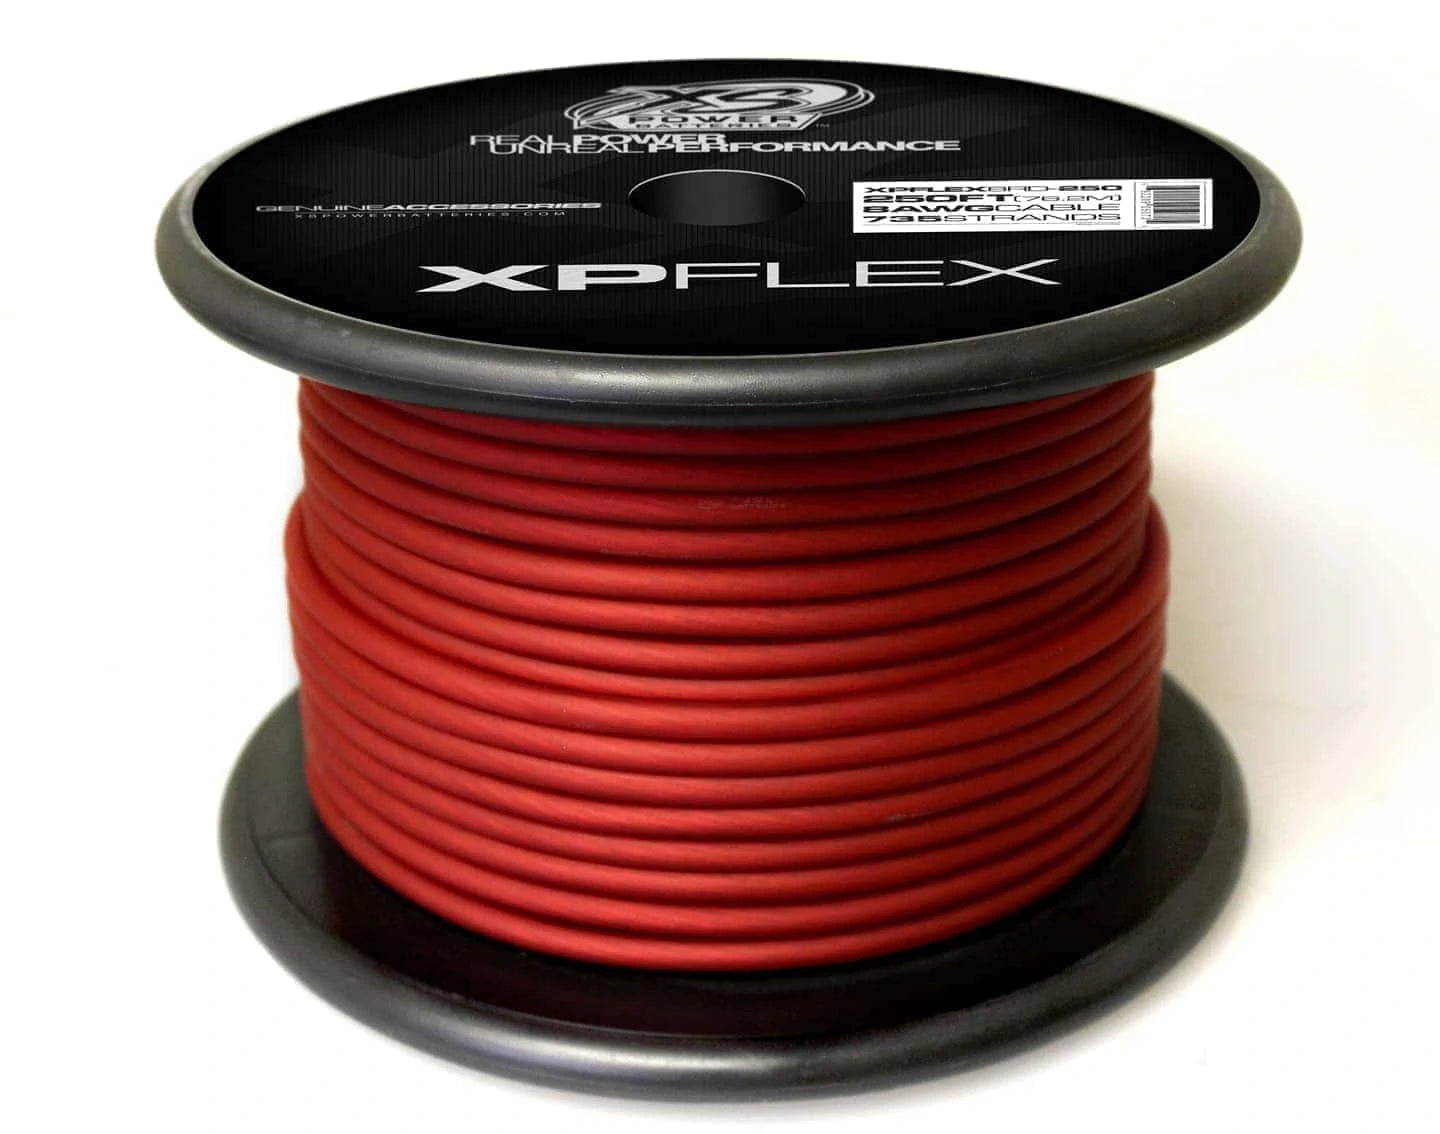 XS Power 8 AWG Gauge XP Flex Car Audio Power and Ground Cable 250ft Spool Electrical Wire